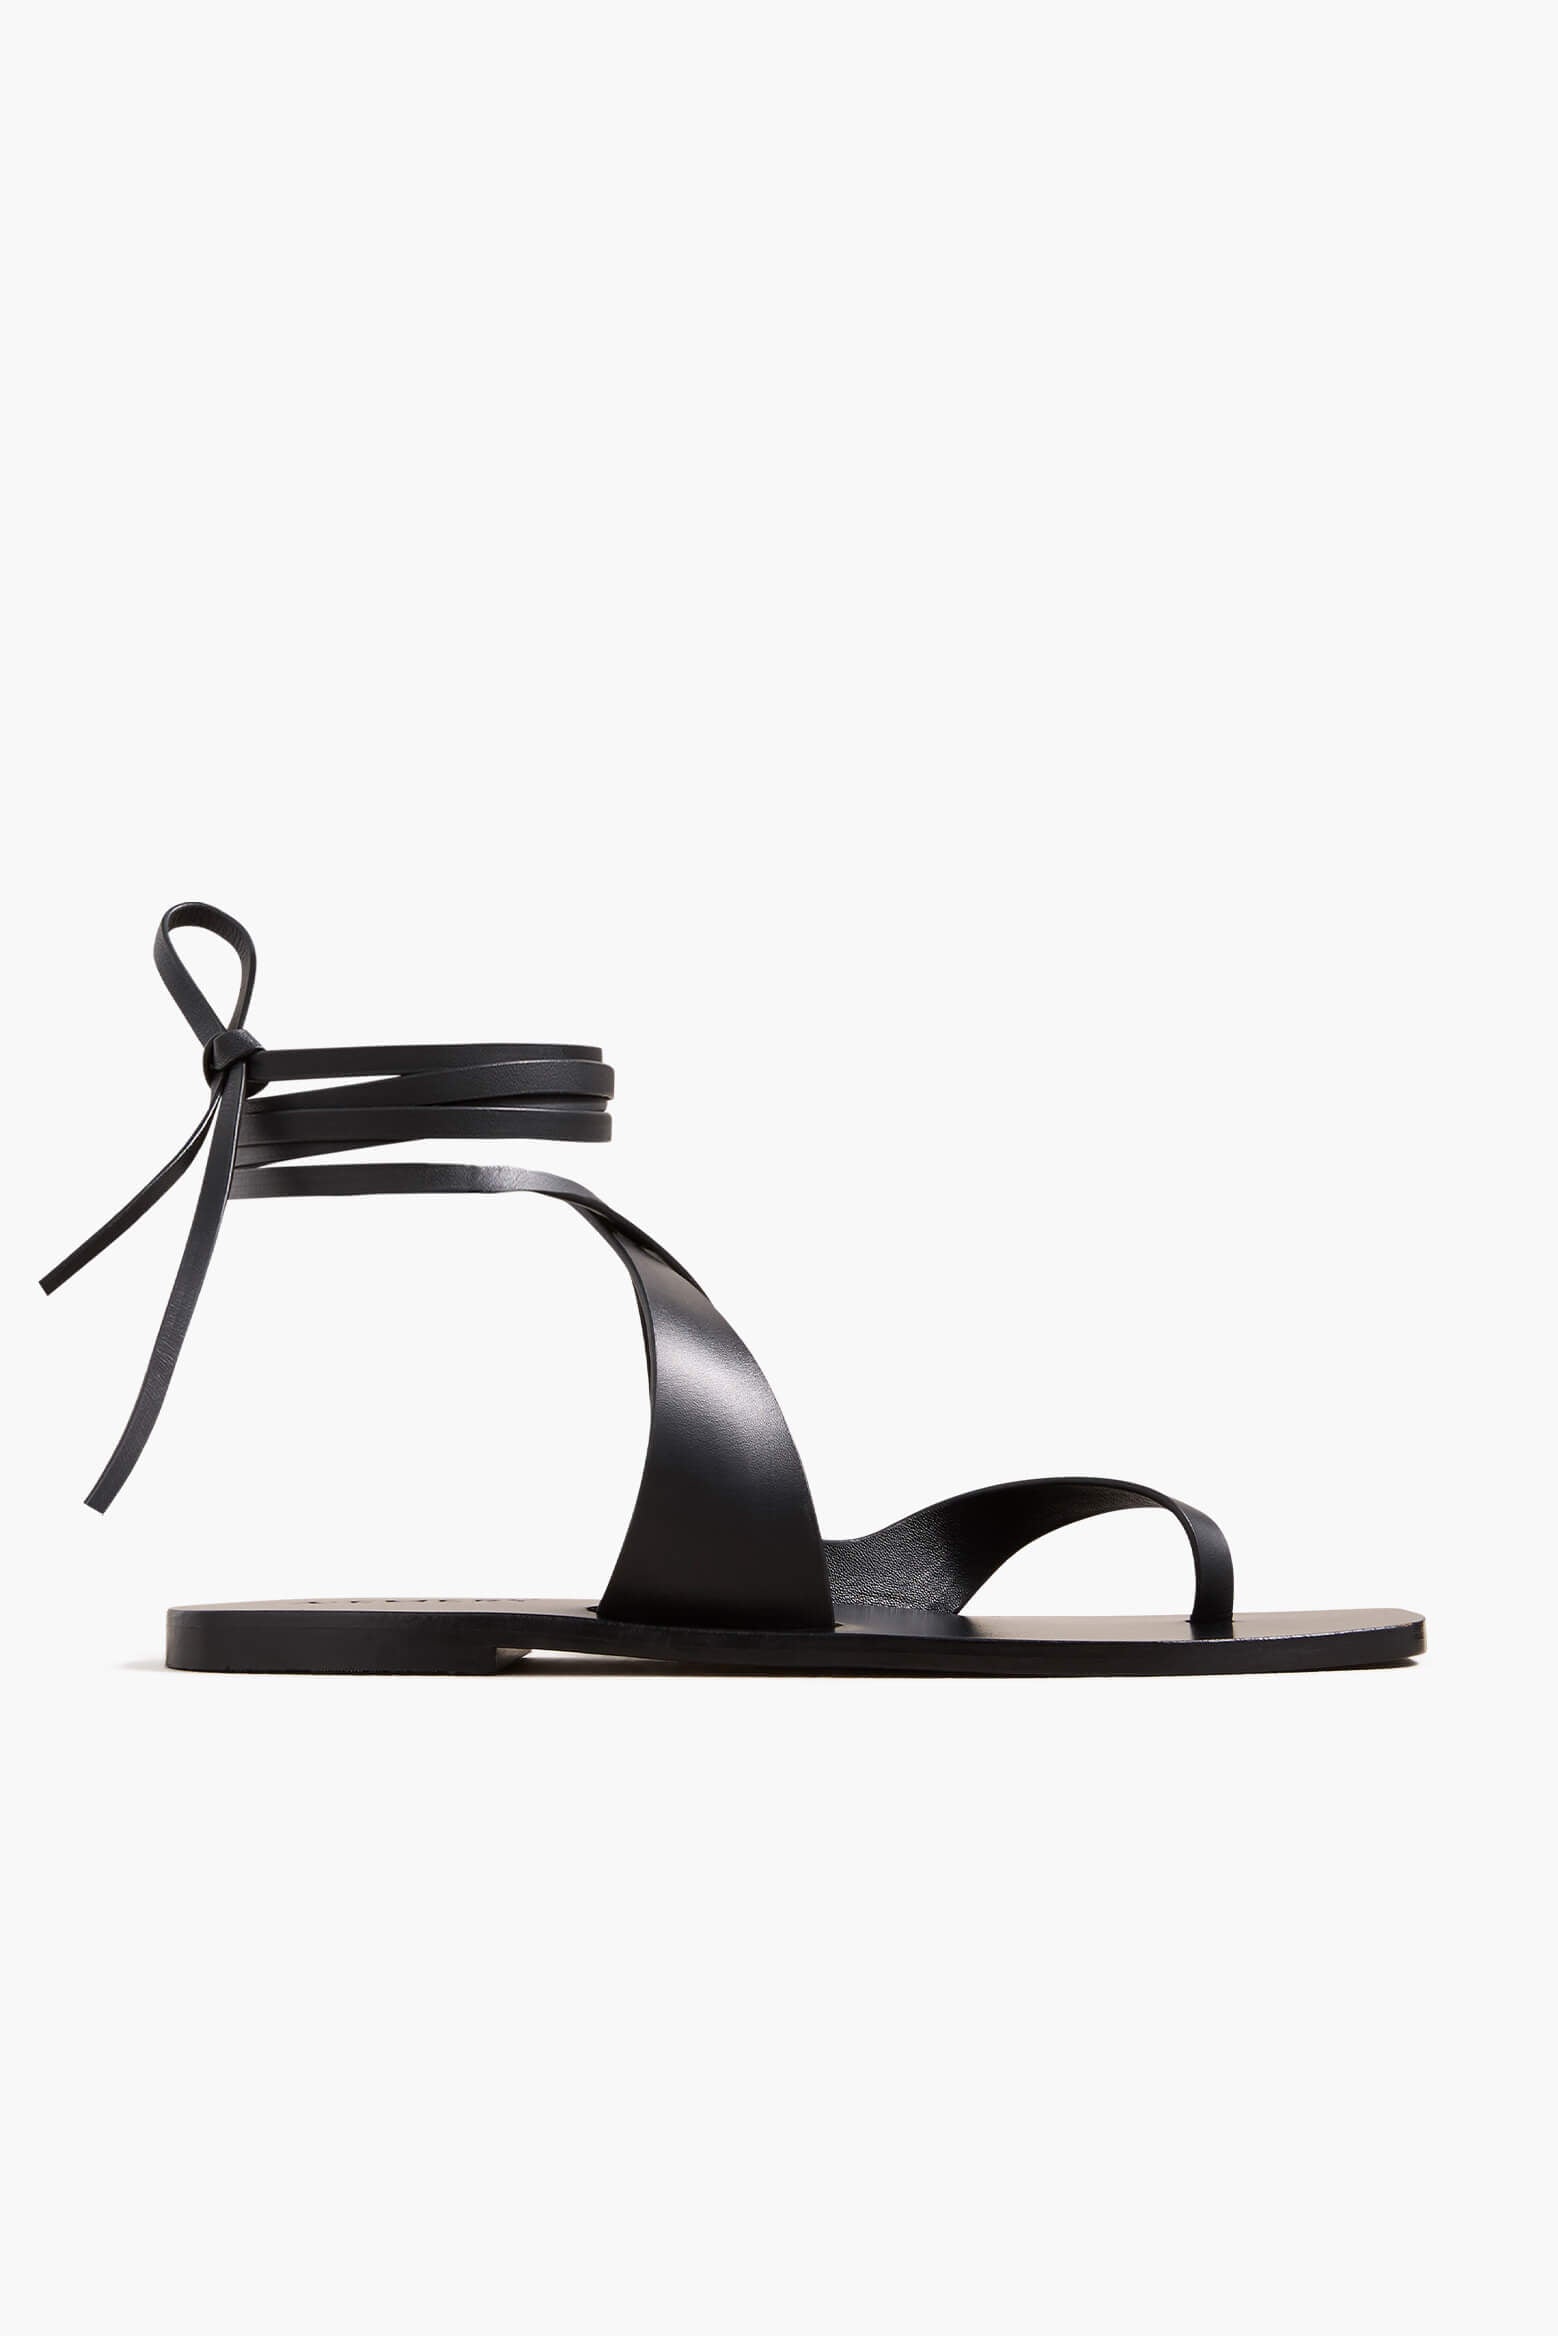 A.EMERY Margaux Sandal in Black | The New Trend